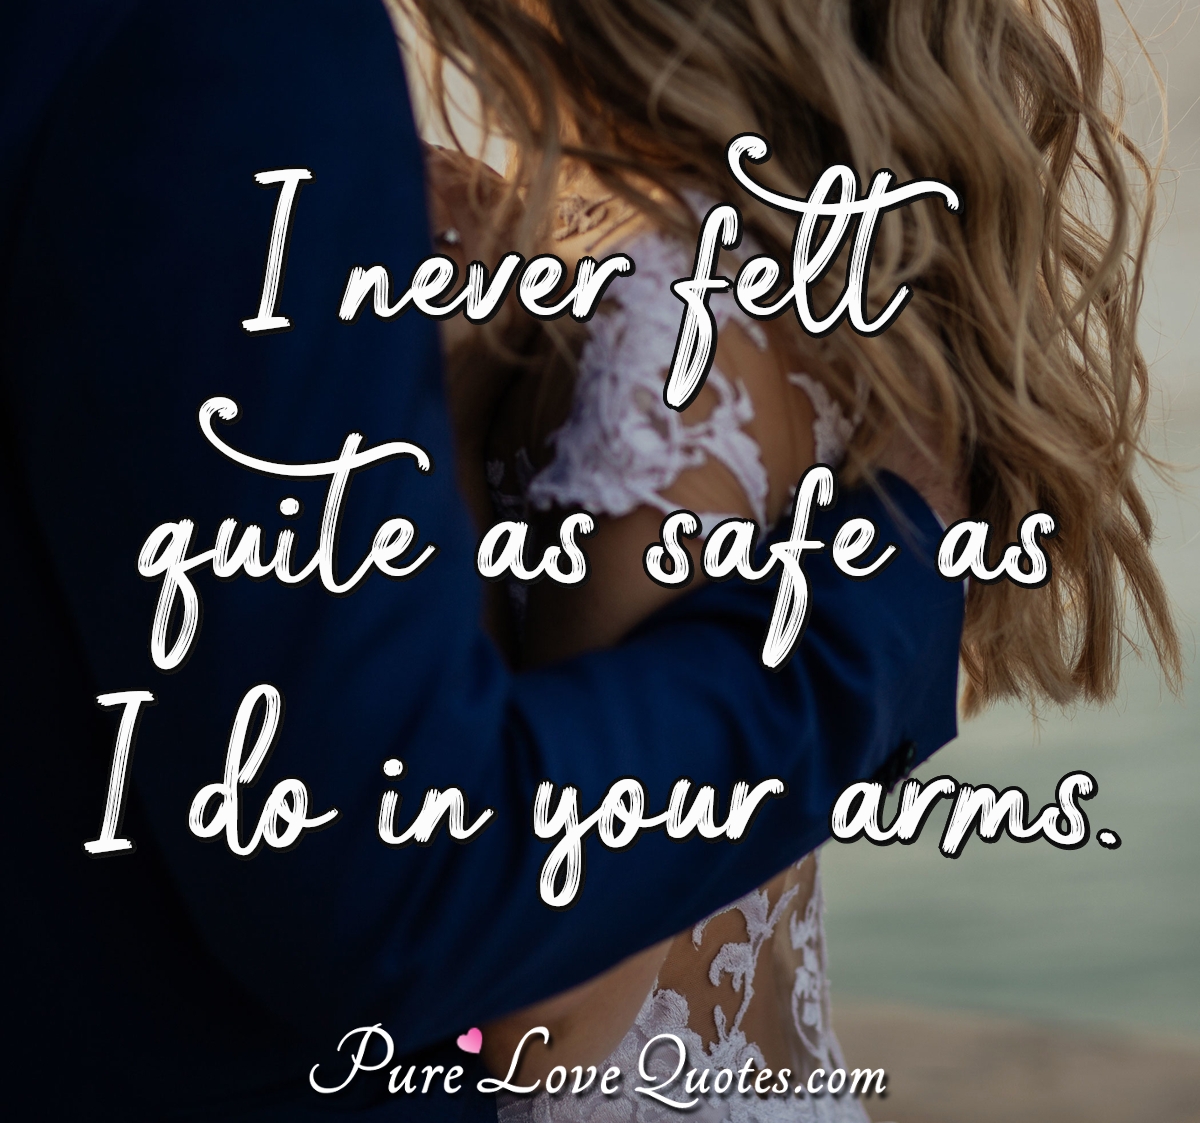 I never felt quite as safe as I do in your arms. - Anonymous